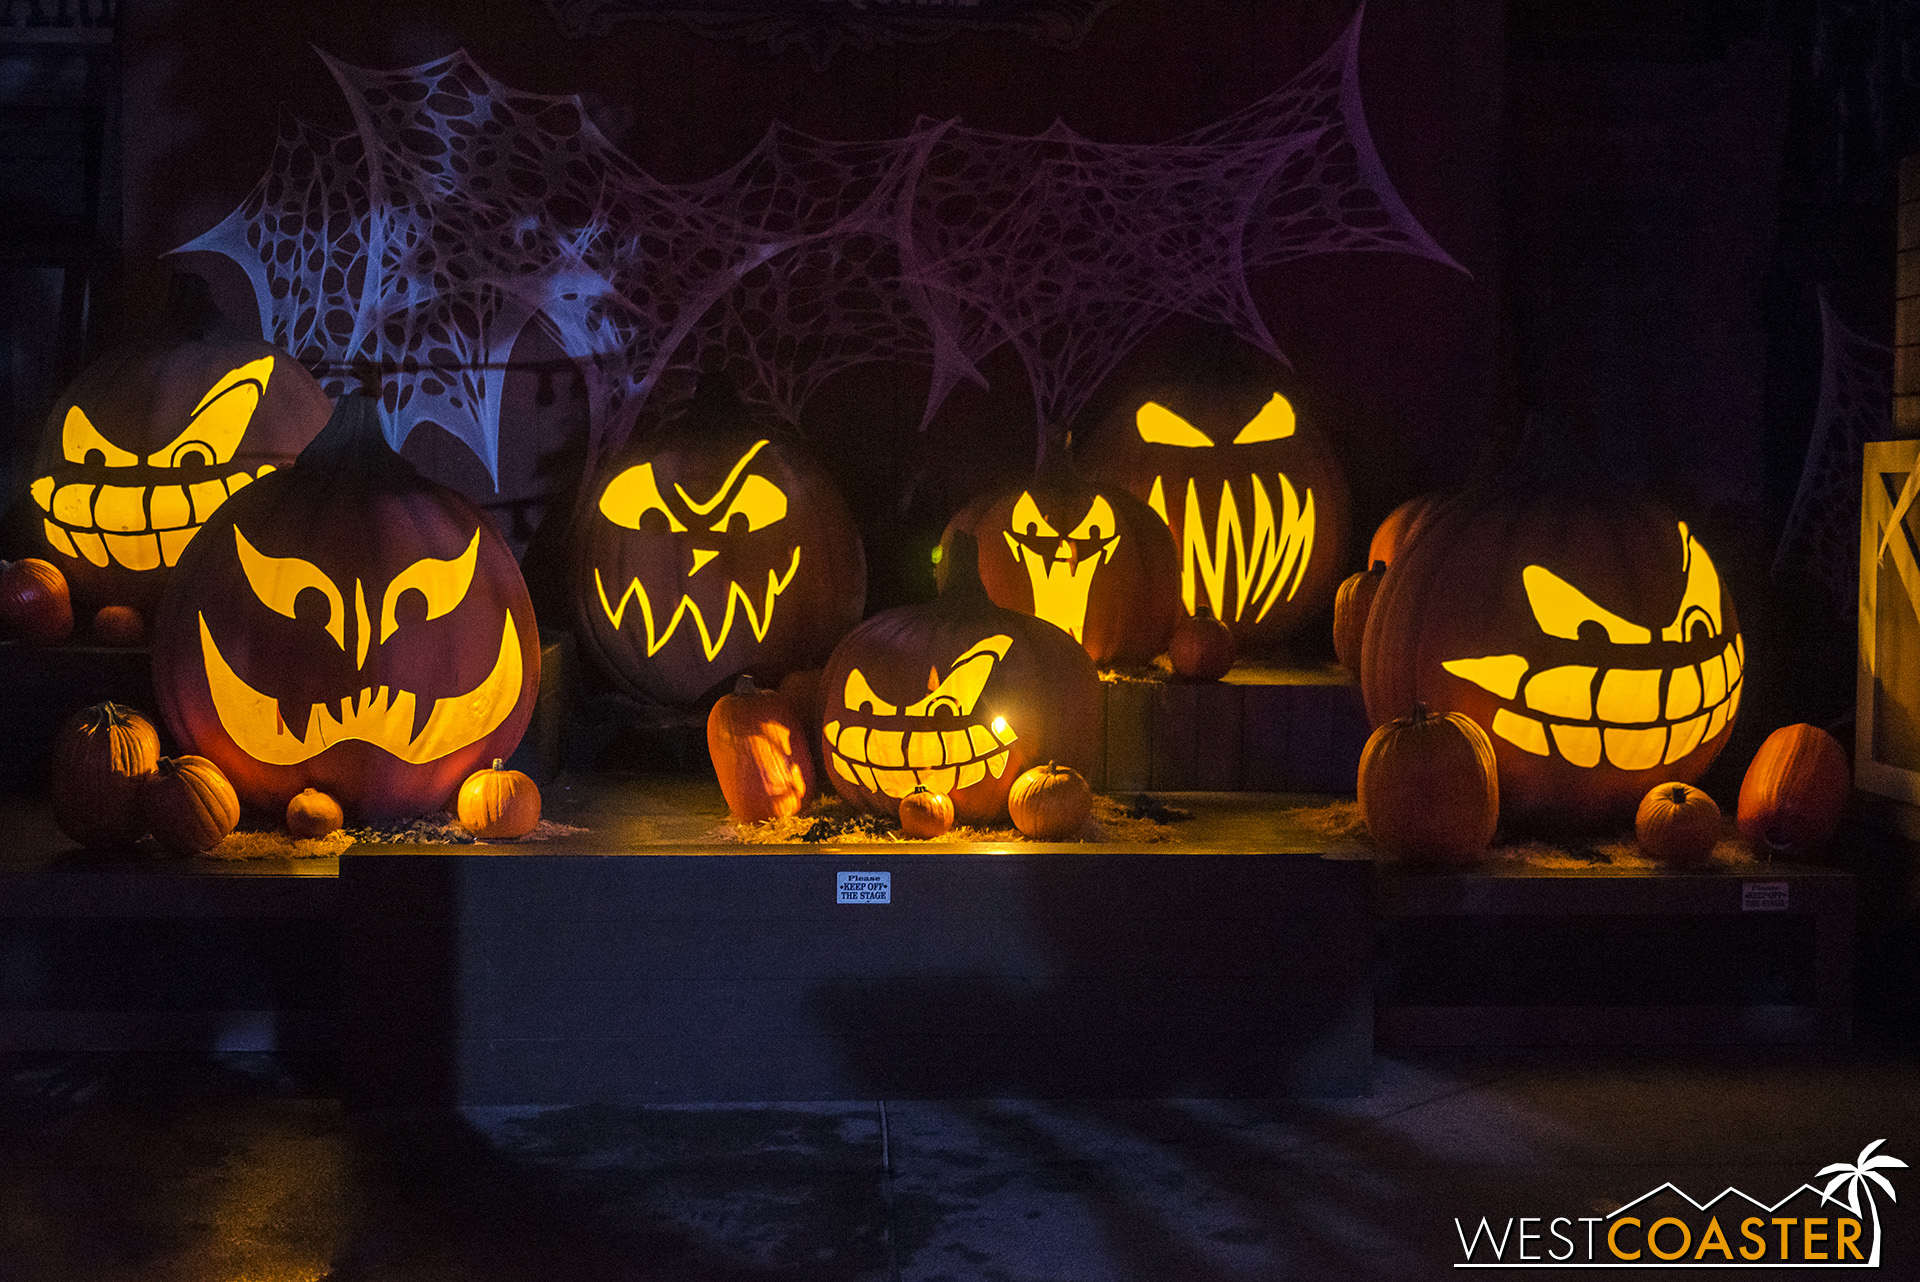  This jack-o-lantern display can be found at the stage in Calico Park. 